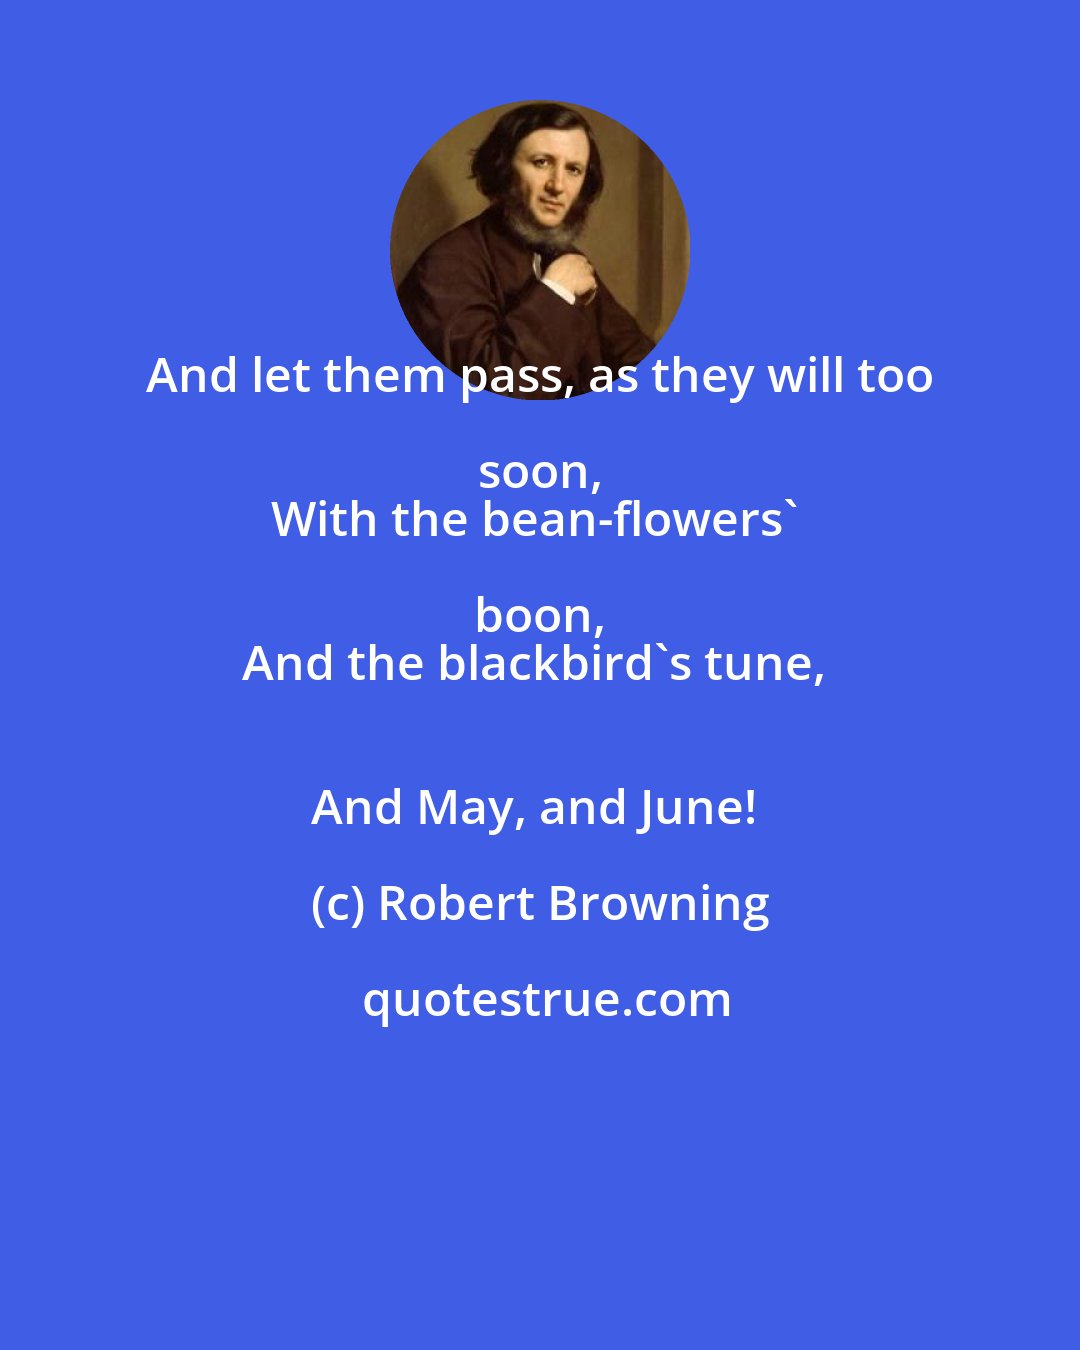 Robert Browning: And let them pass, as they will too soon, 
With the bean-flowers' boon, 
And the blackbird's tune, 
And May, and June!